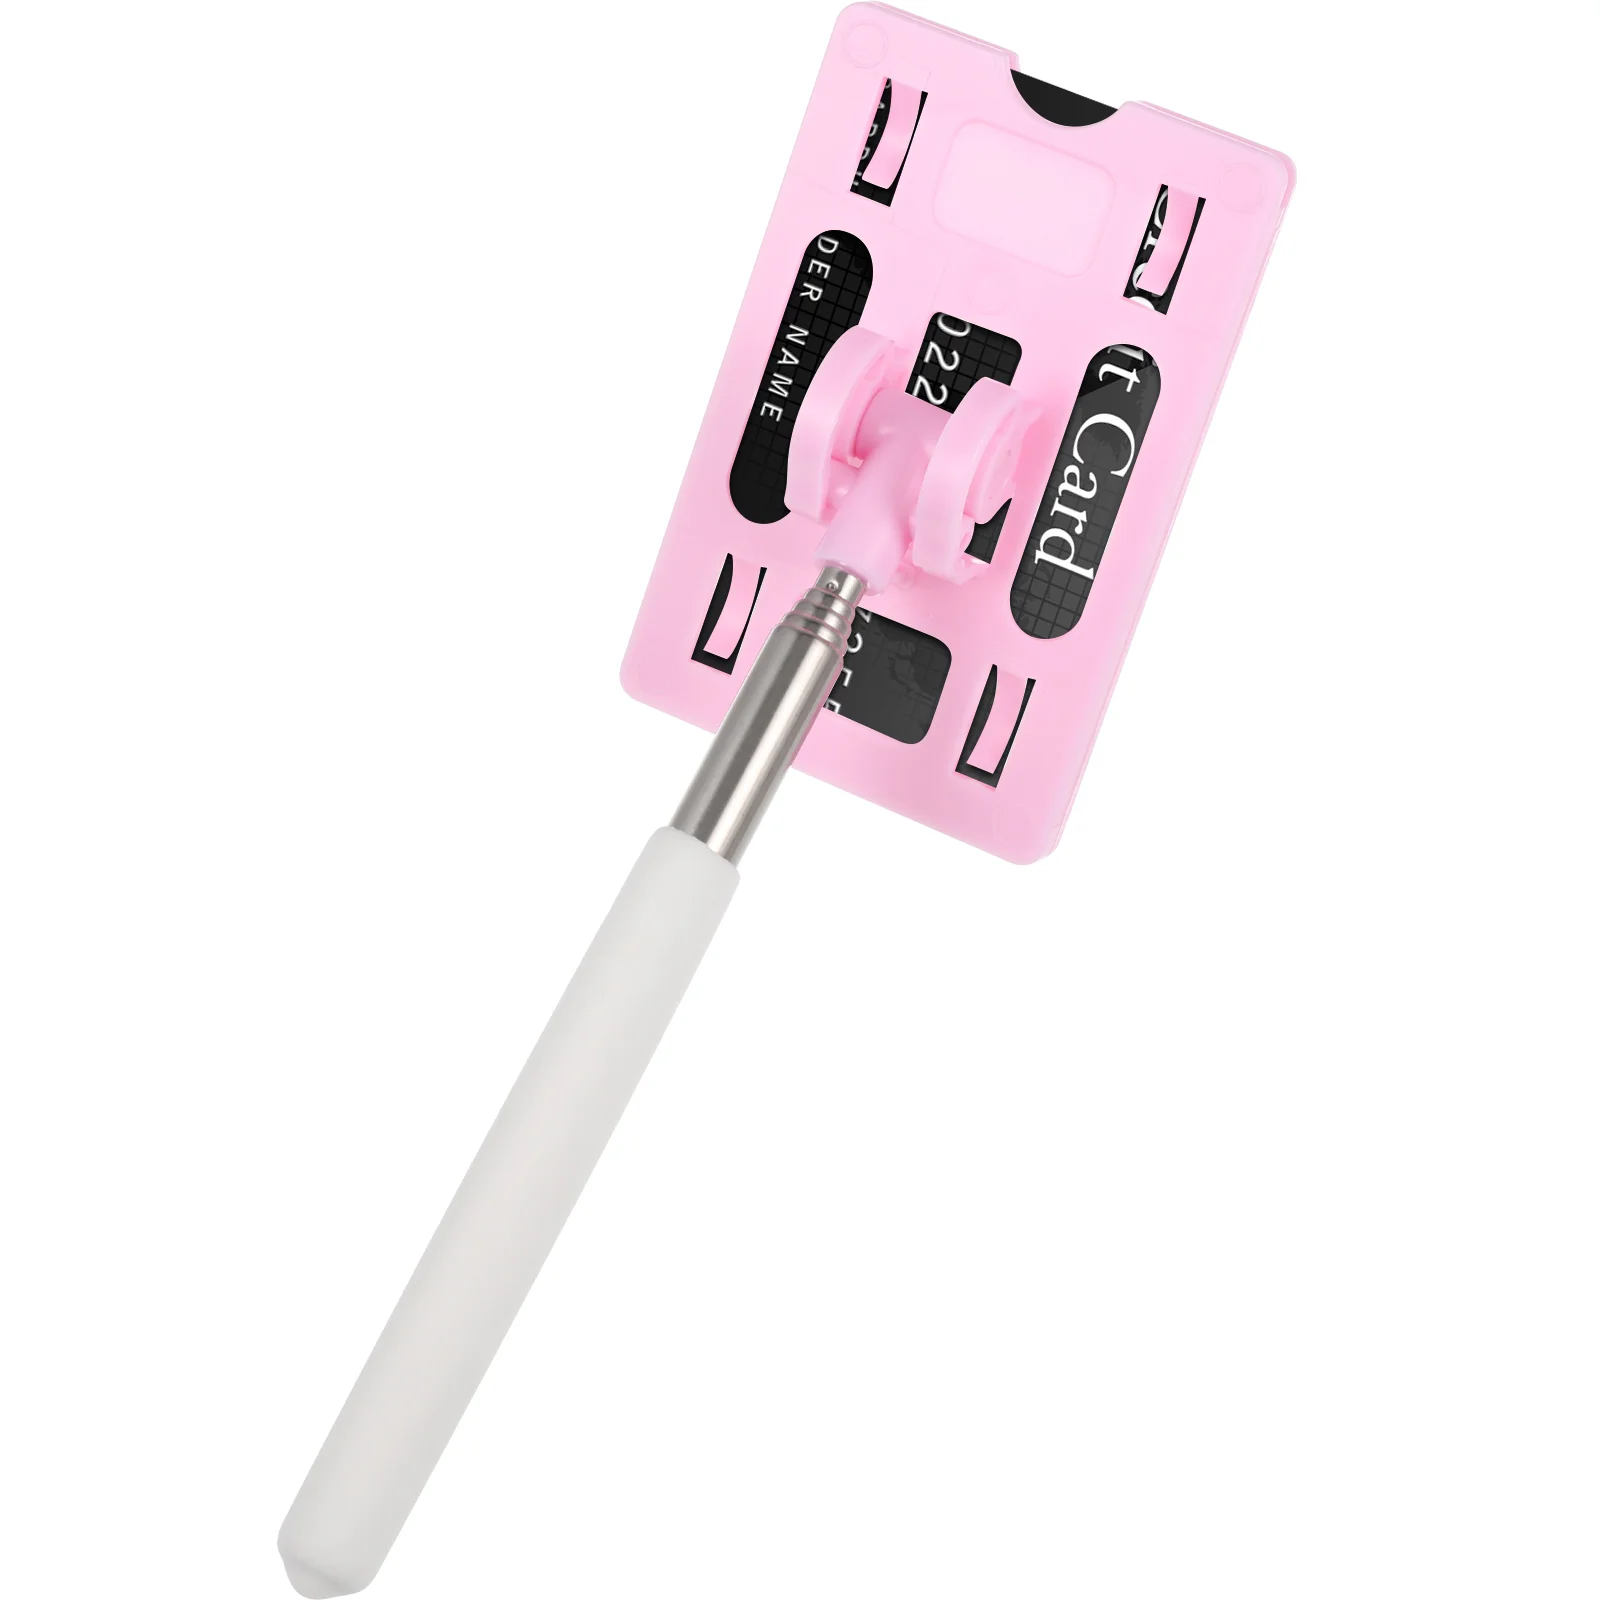 

Contactless Parking Fee Payment Stick Telescopic Pole Toll Swiping Rod Designed Card Tools